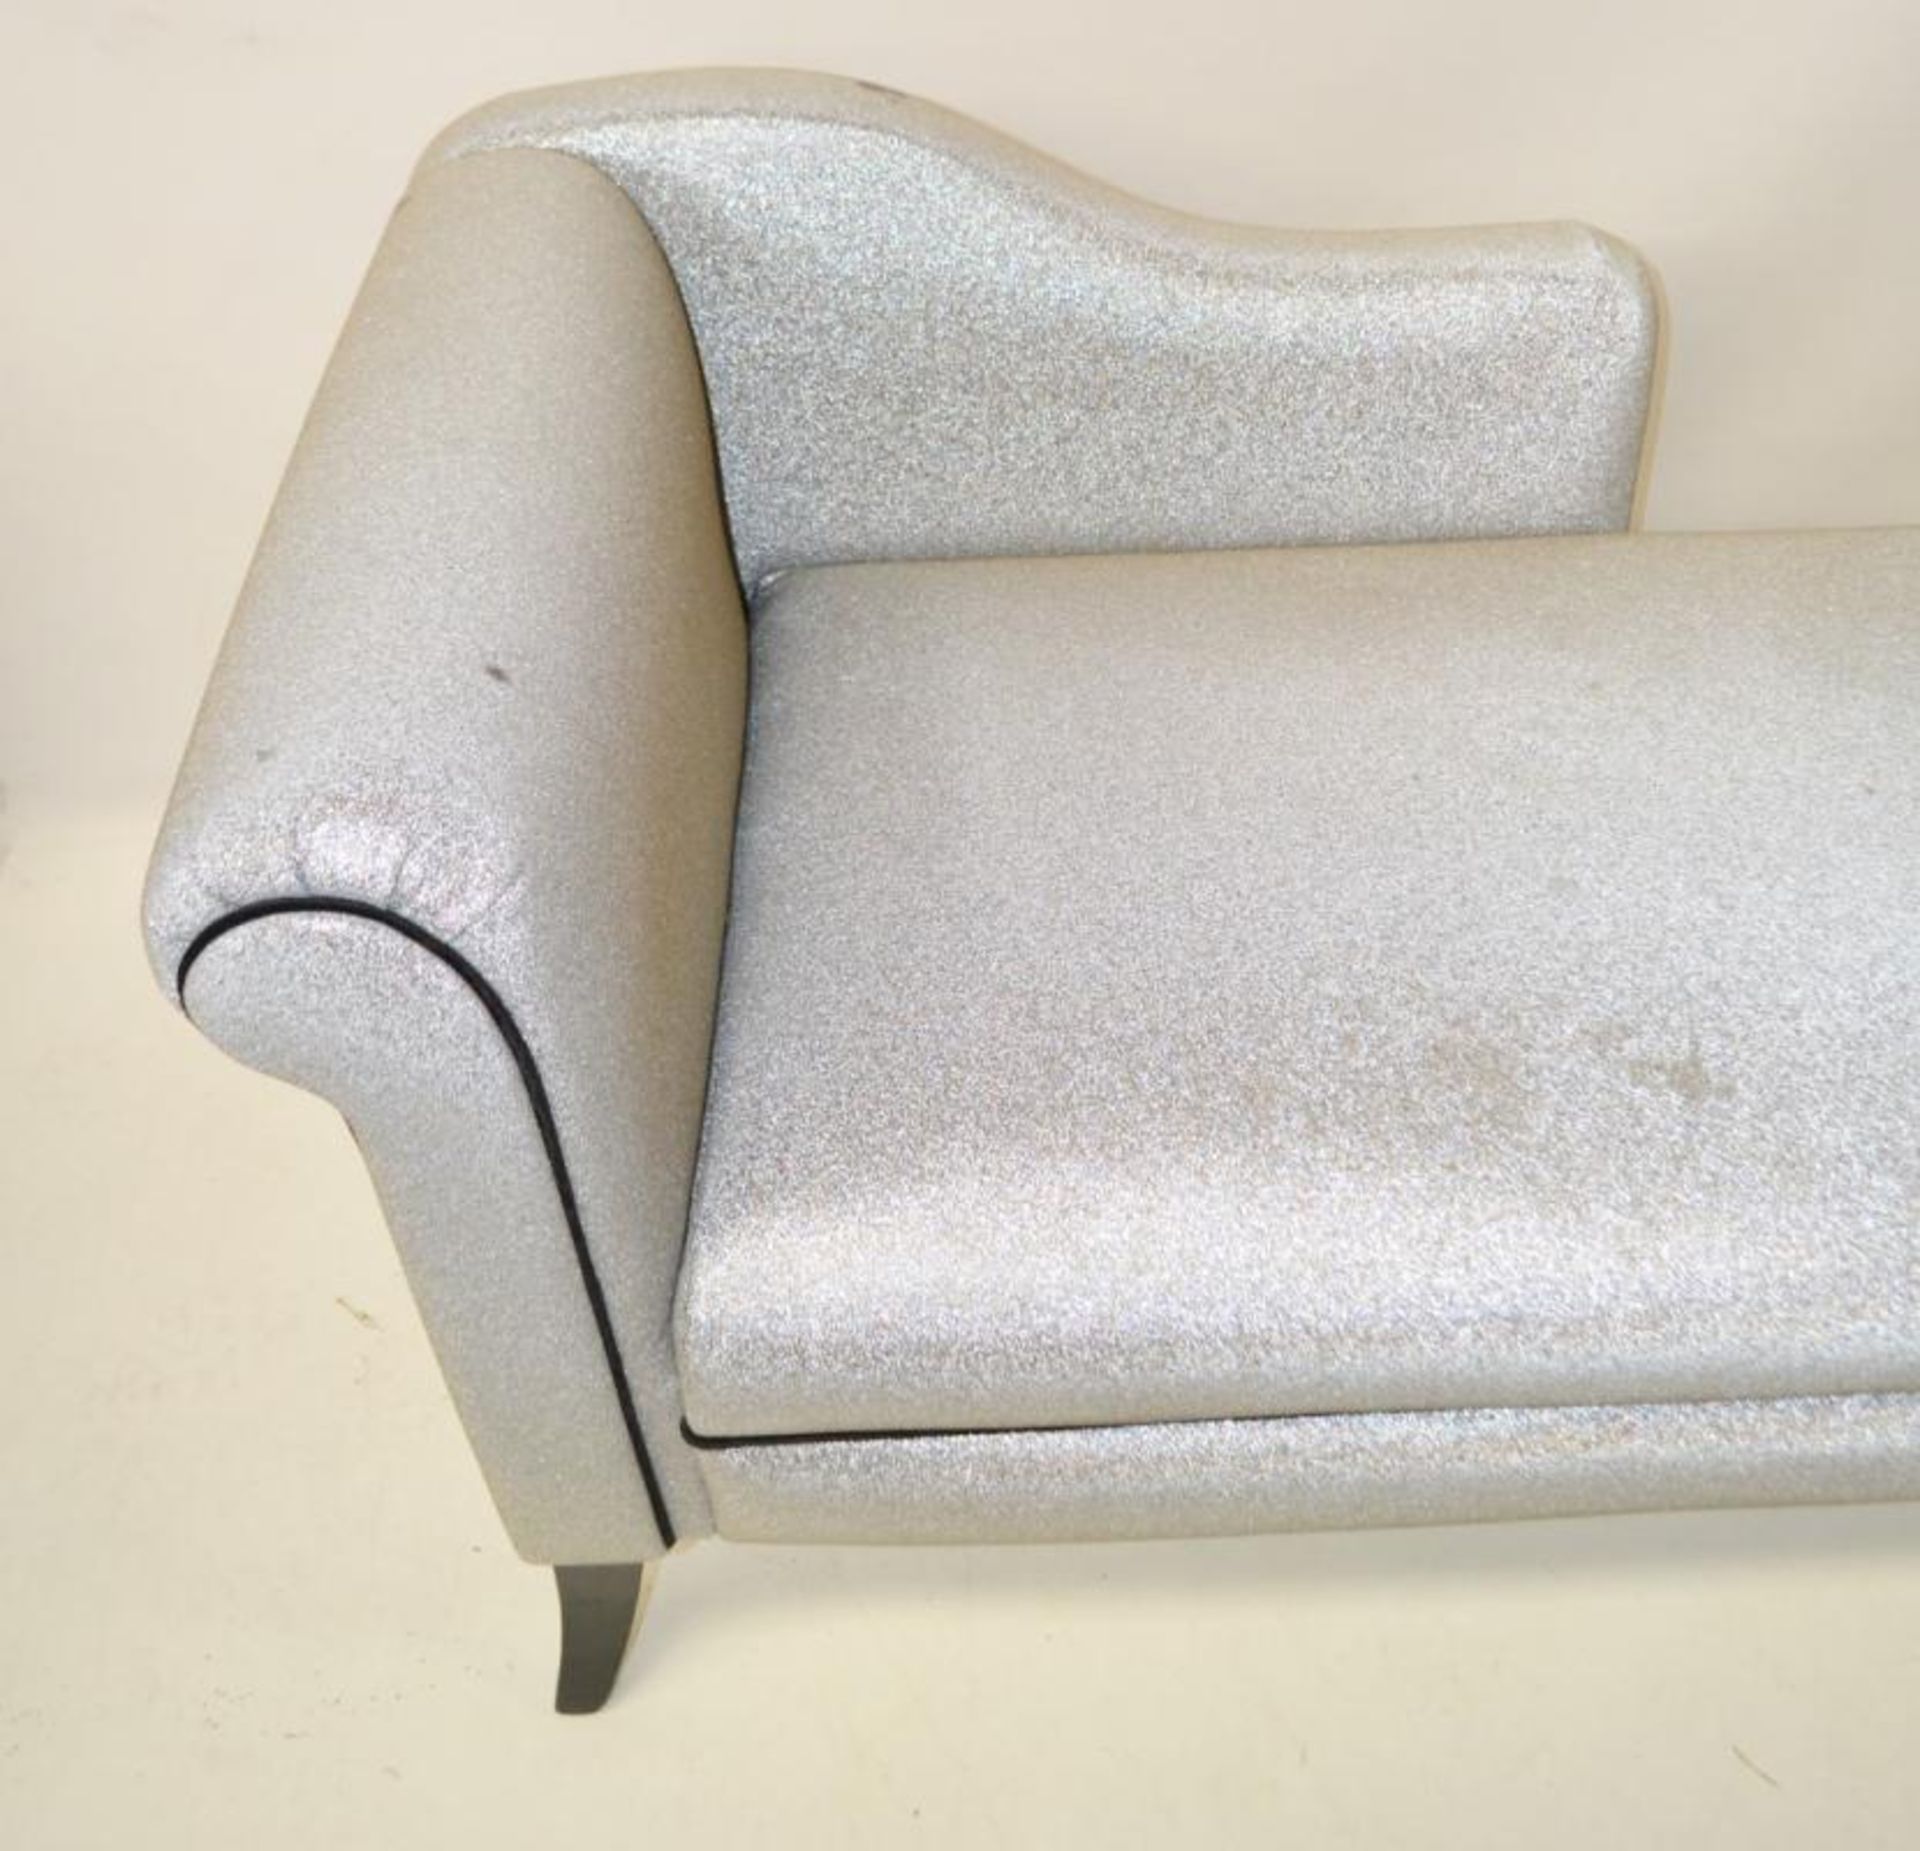 1 x Chaise Lounge Chair Finished In Silver Glitter - Ref: BLT376 - CL380 - NO VAT ON THE HAMMER - - Image 2 of 8